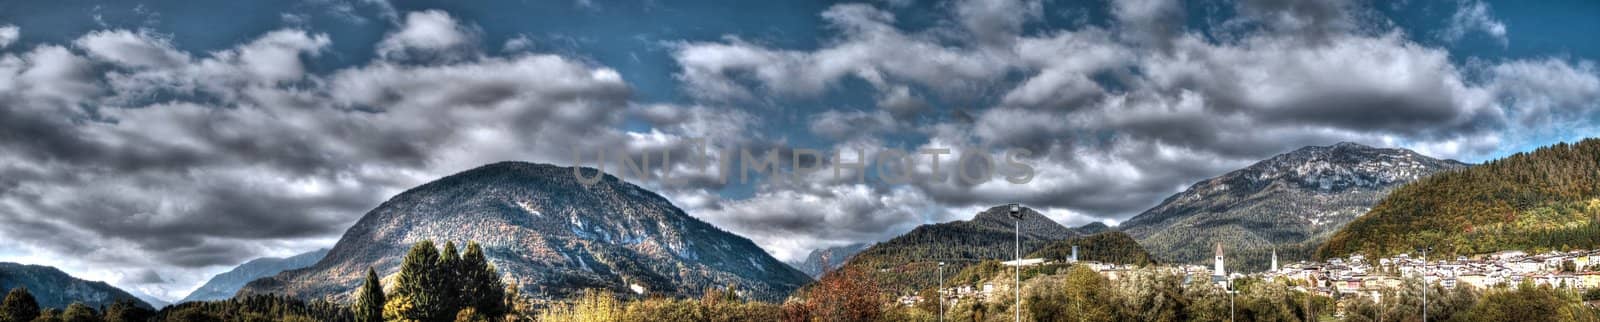 A shoot of Castello Tesino, a small village in the Trentino Country.